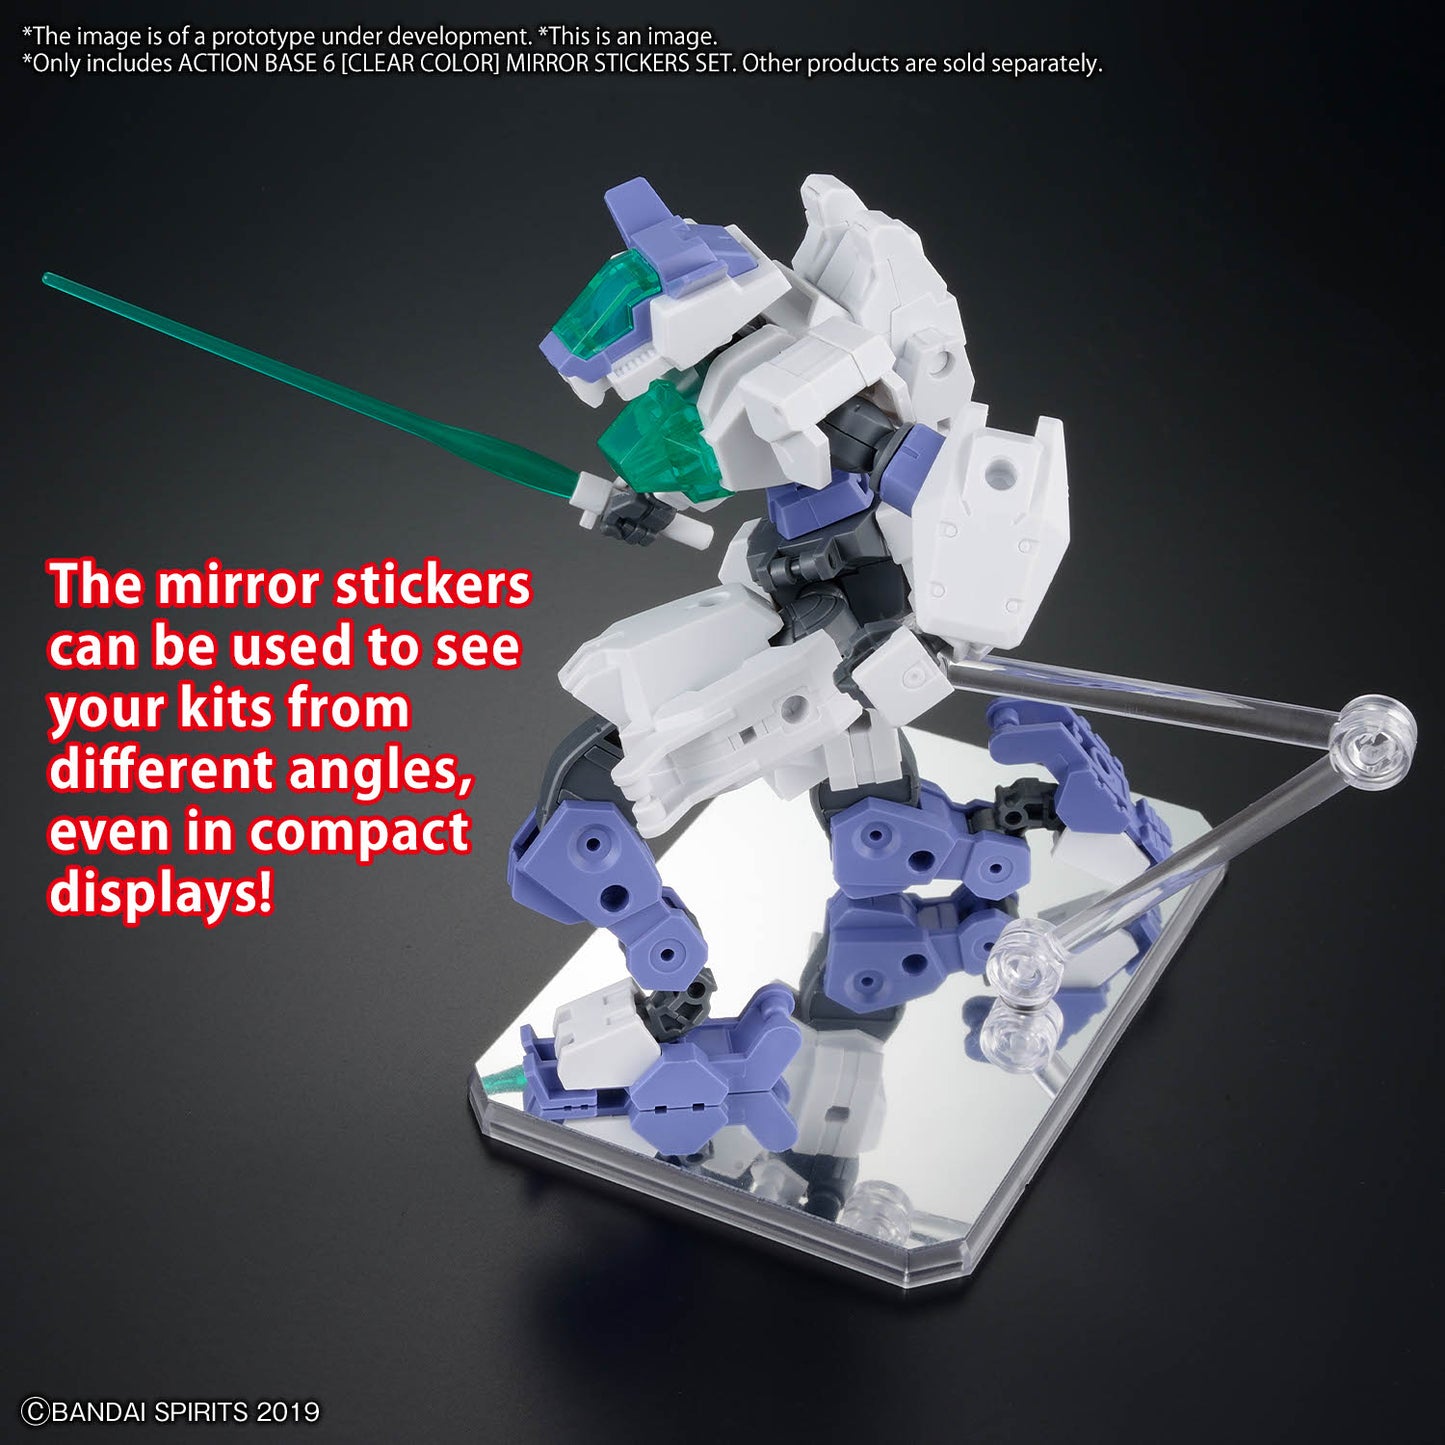 GUNDAM - Action Base 6 (Clear Color) Mirror Stickers Set